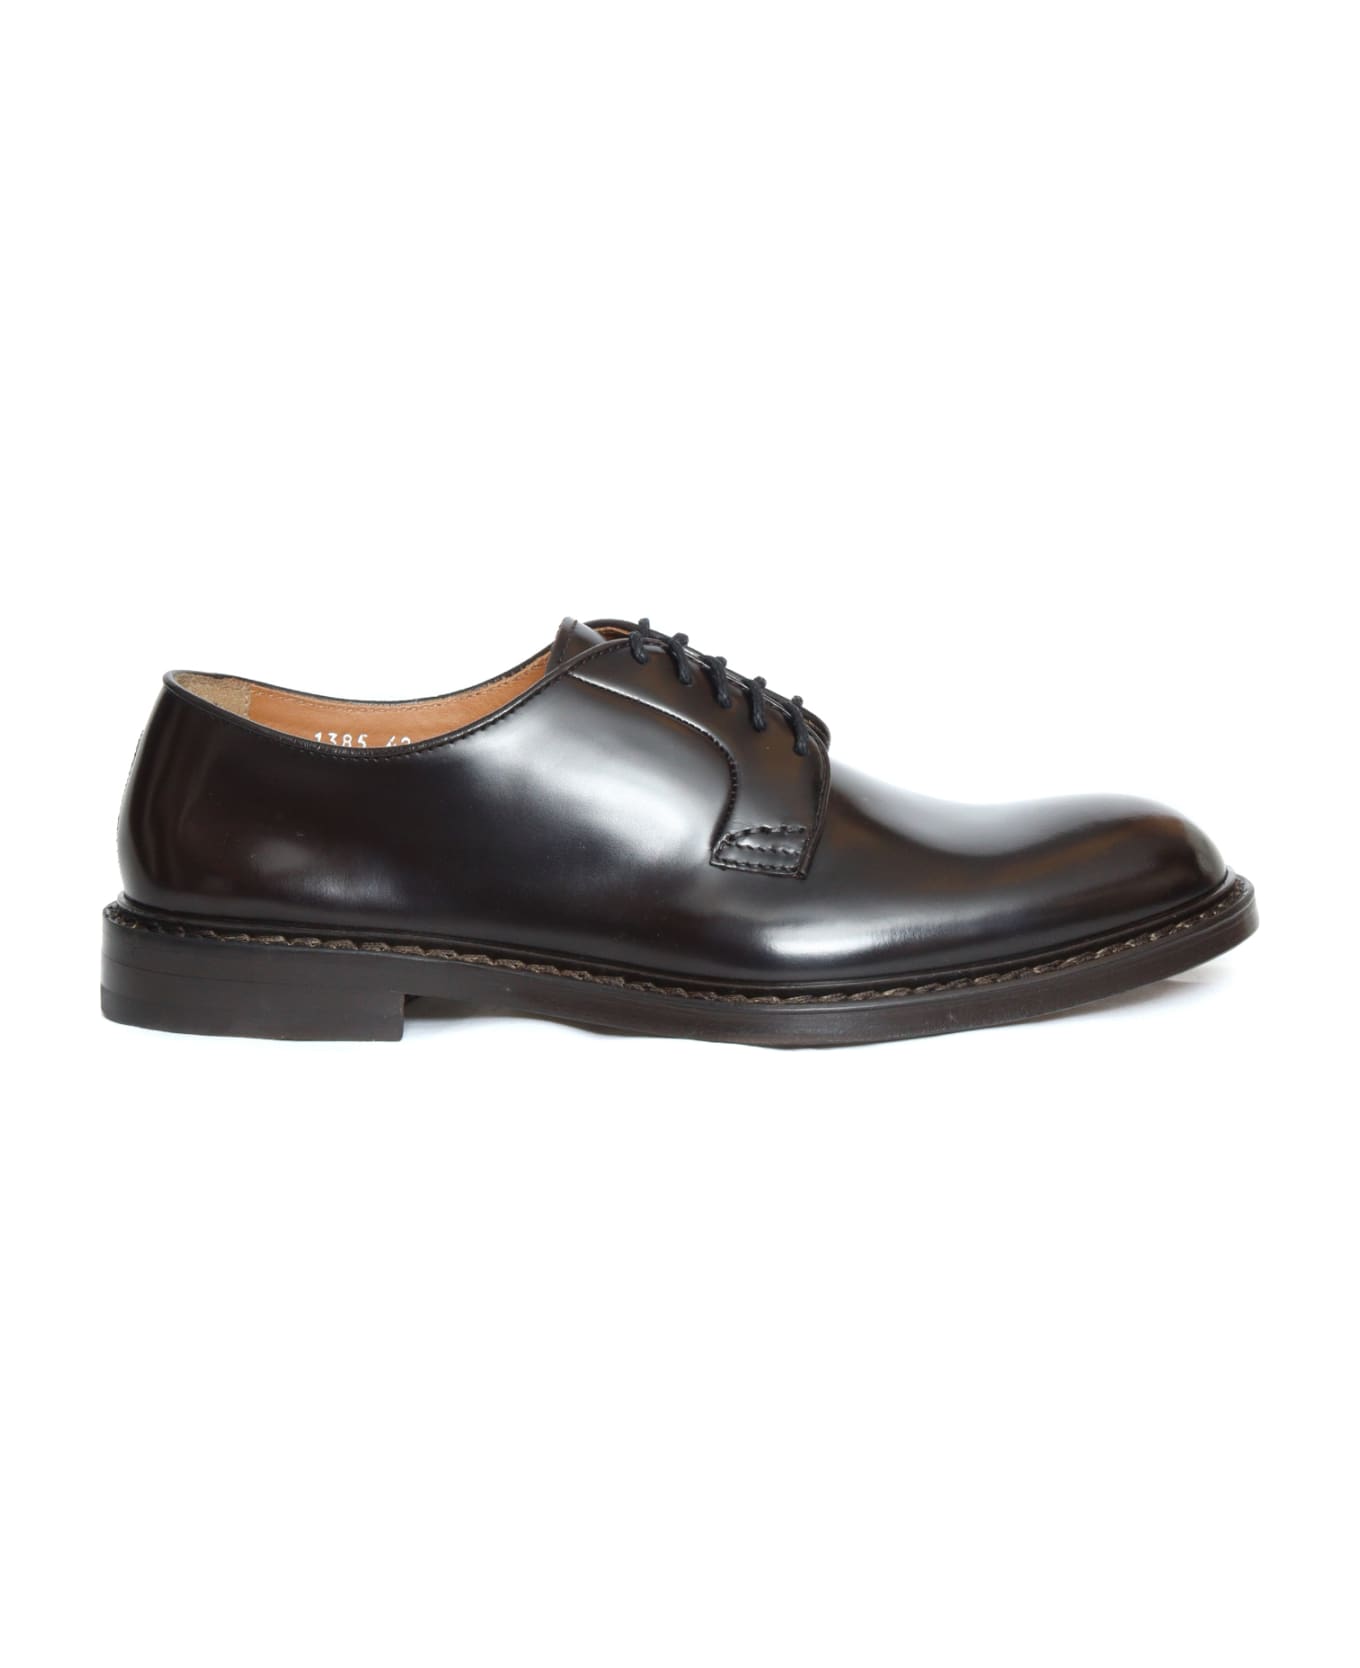 Doucal's Brown Derby Lace-ups - BROWN